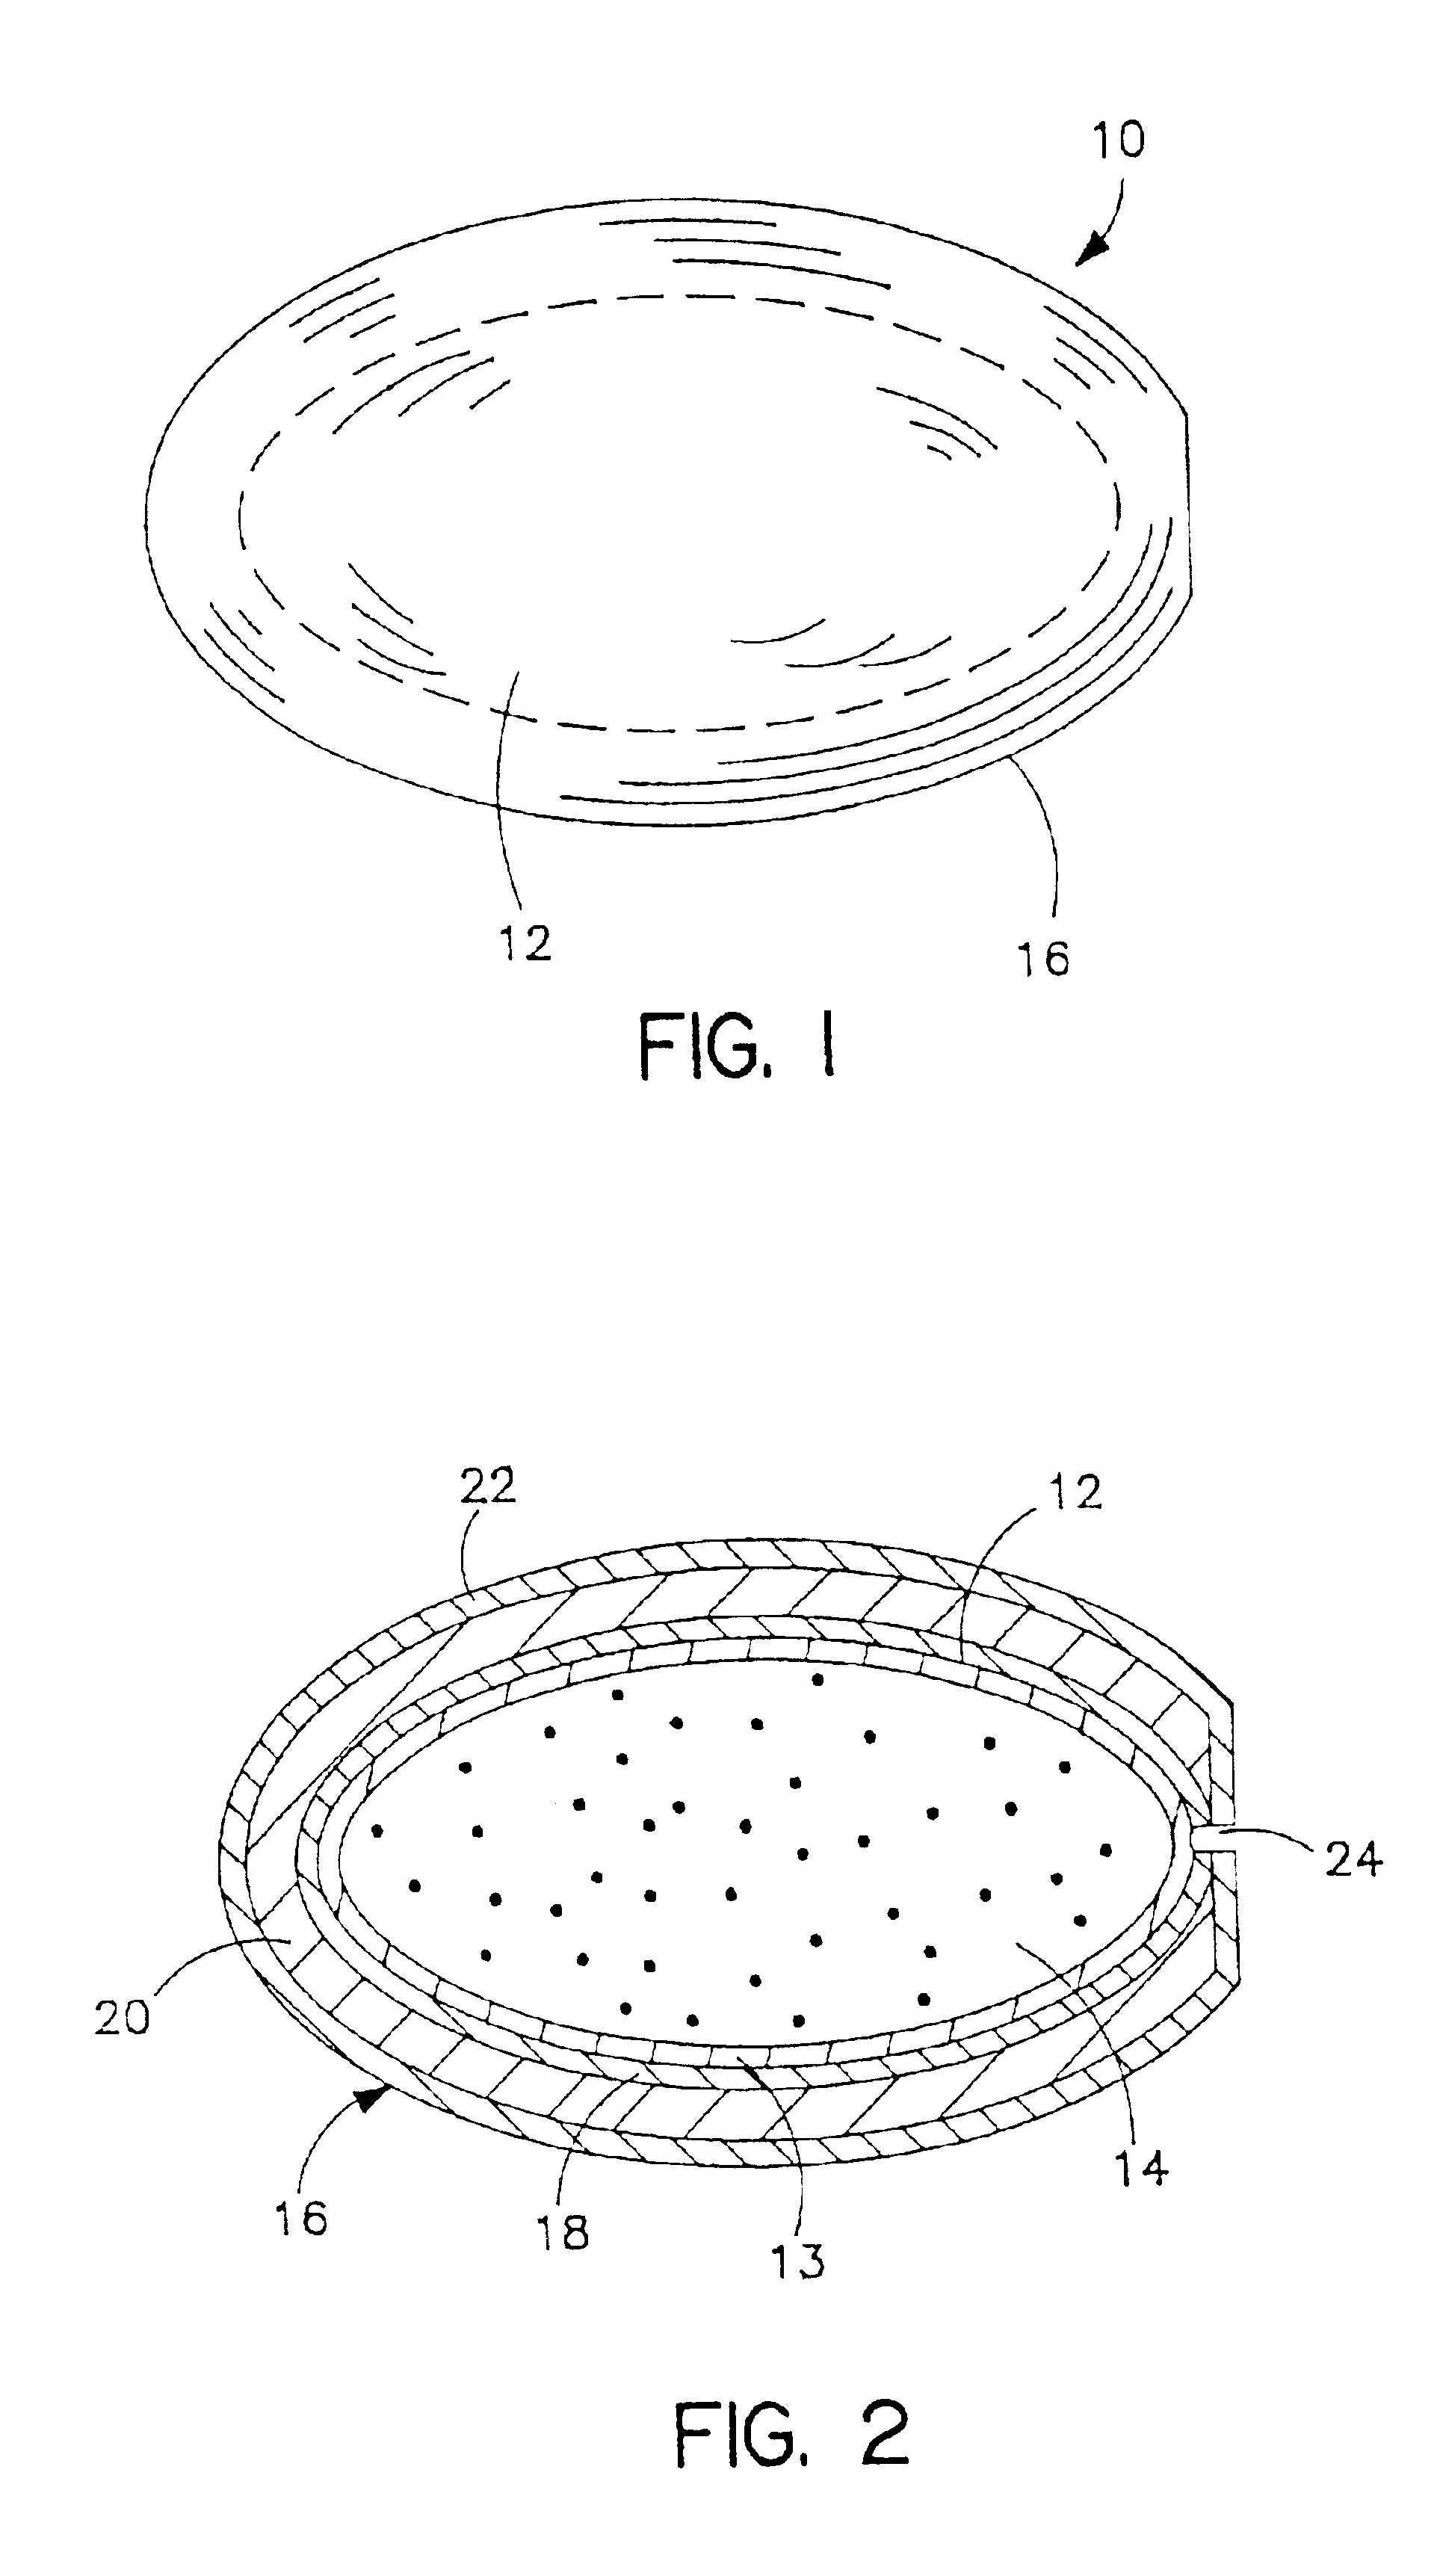 Conversion of liquid filled gelatin capsules into controlled release systems by multiple coatings